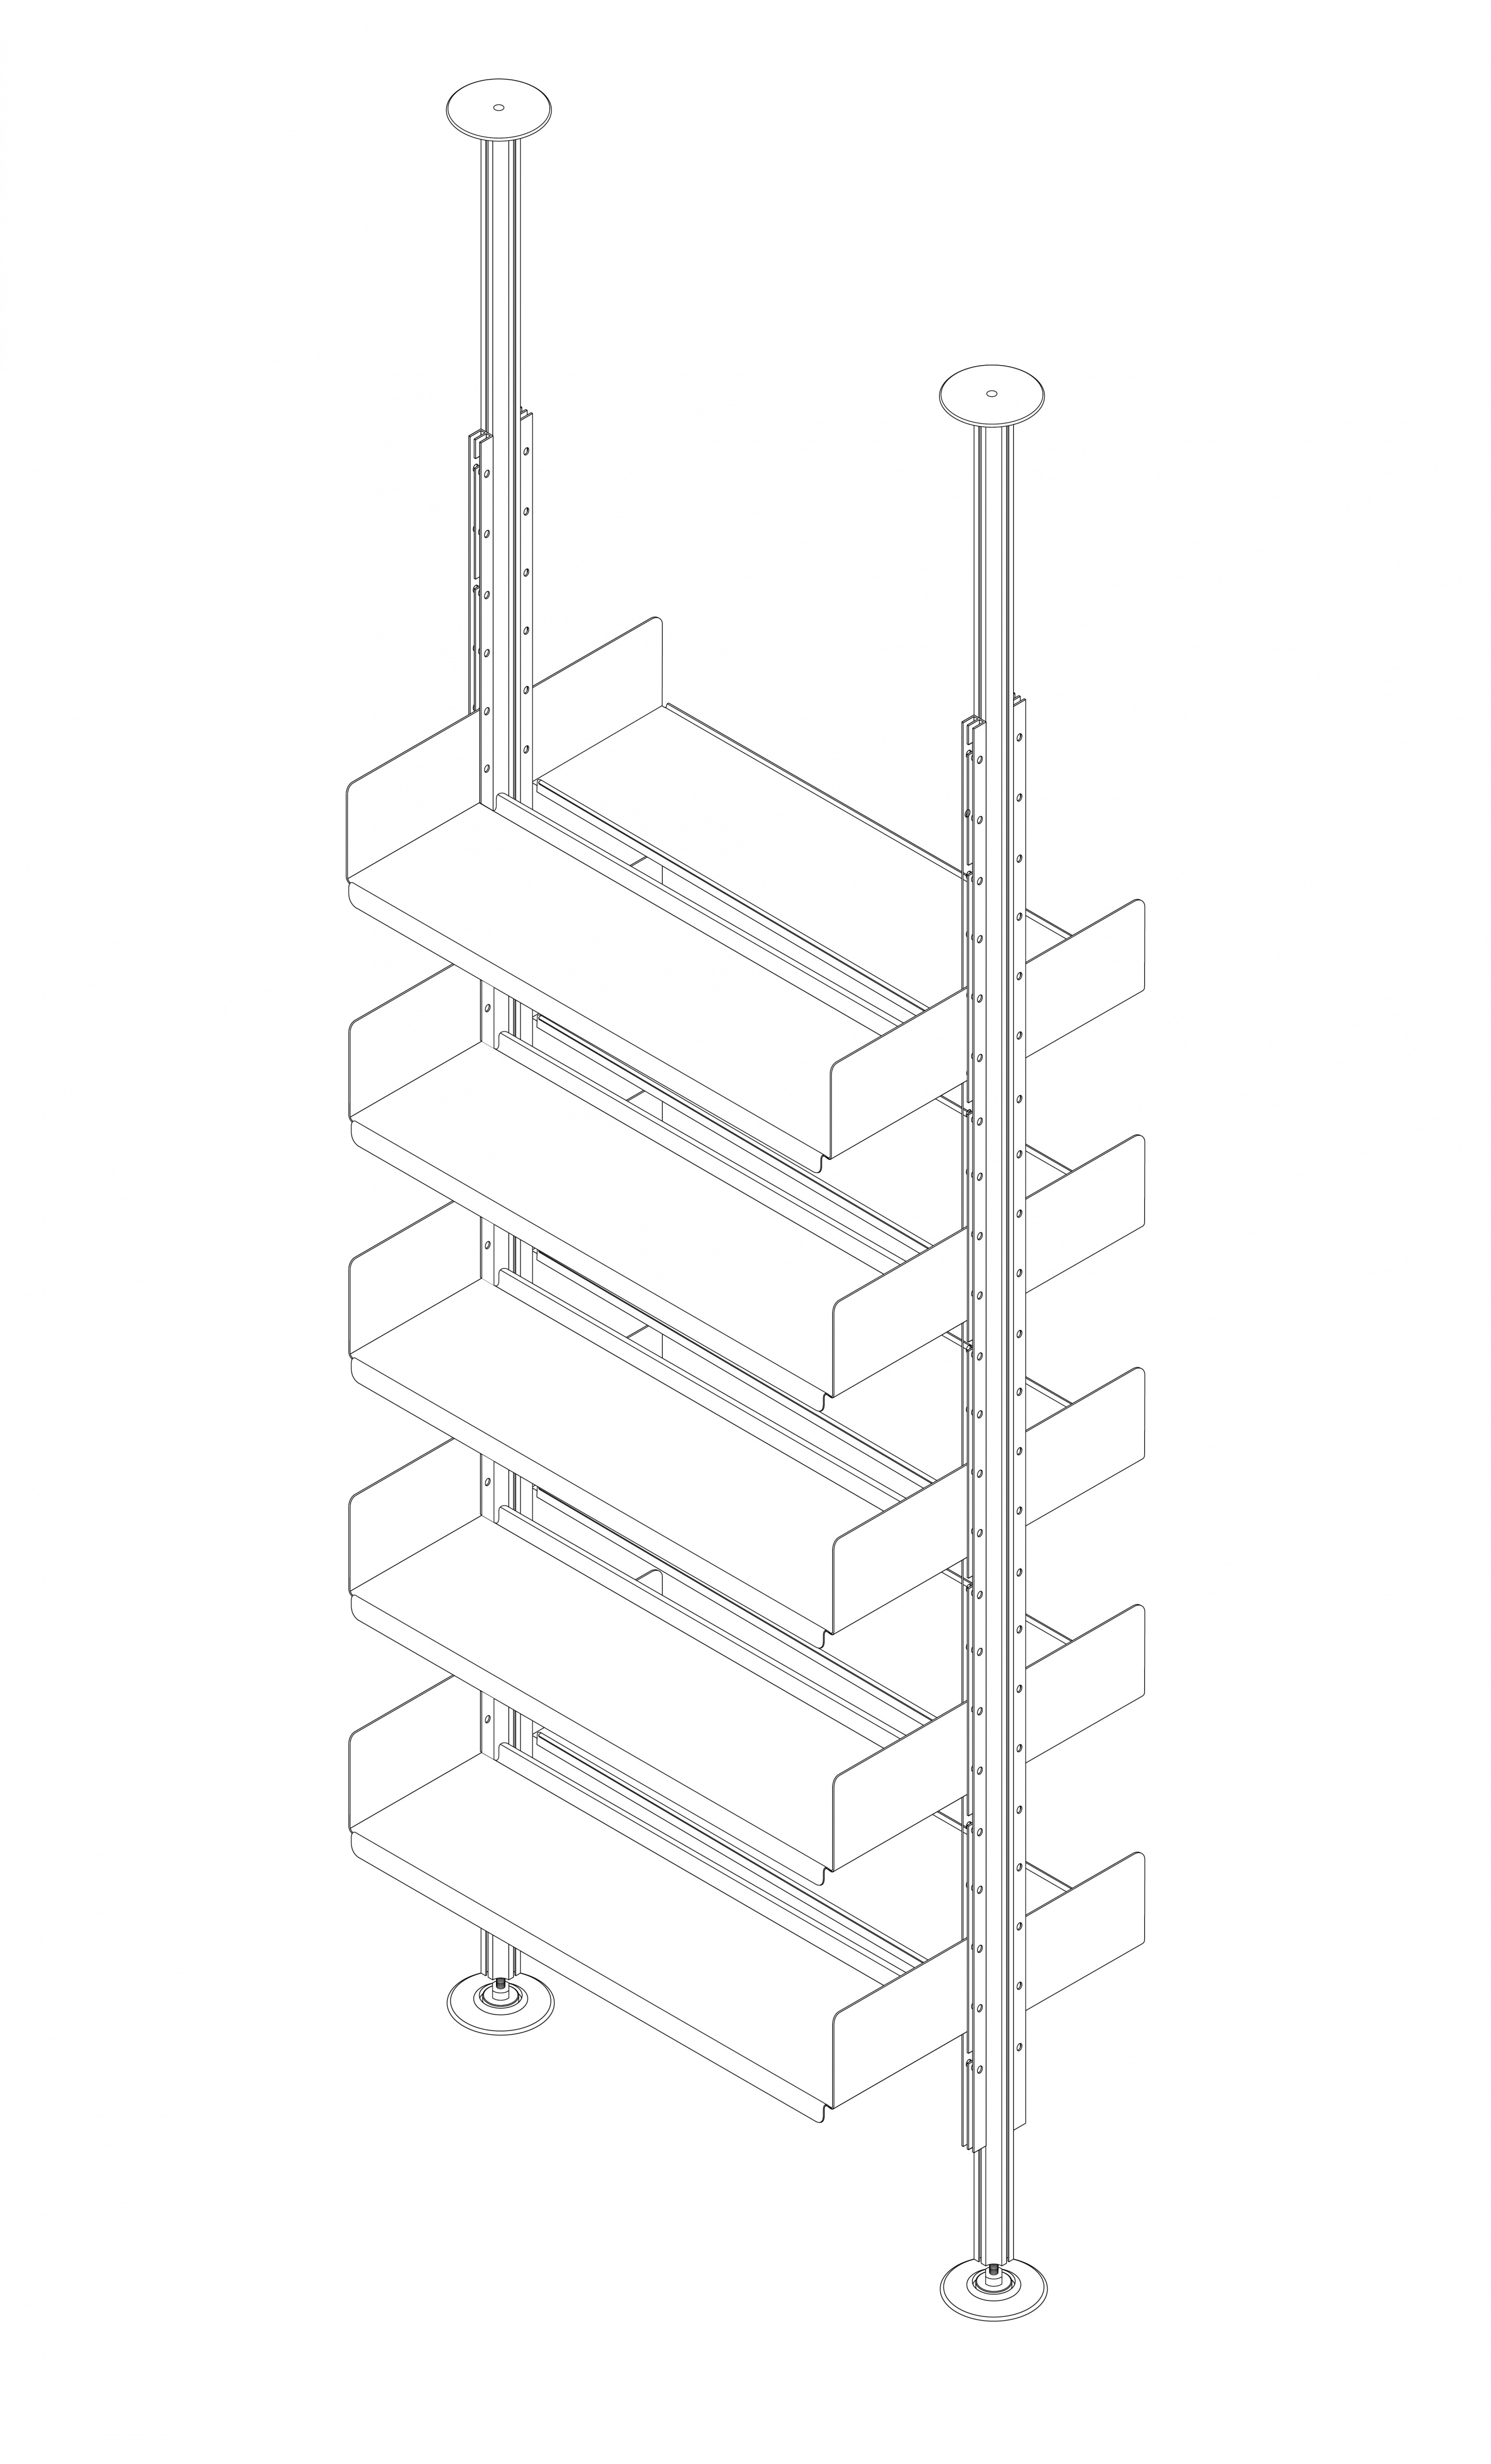 Compressed mounted 606 structure illustration